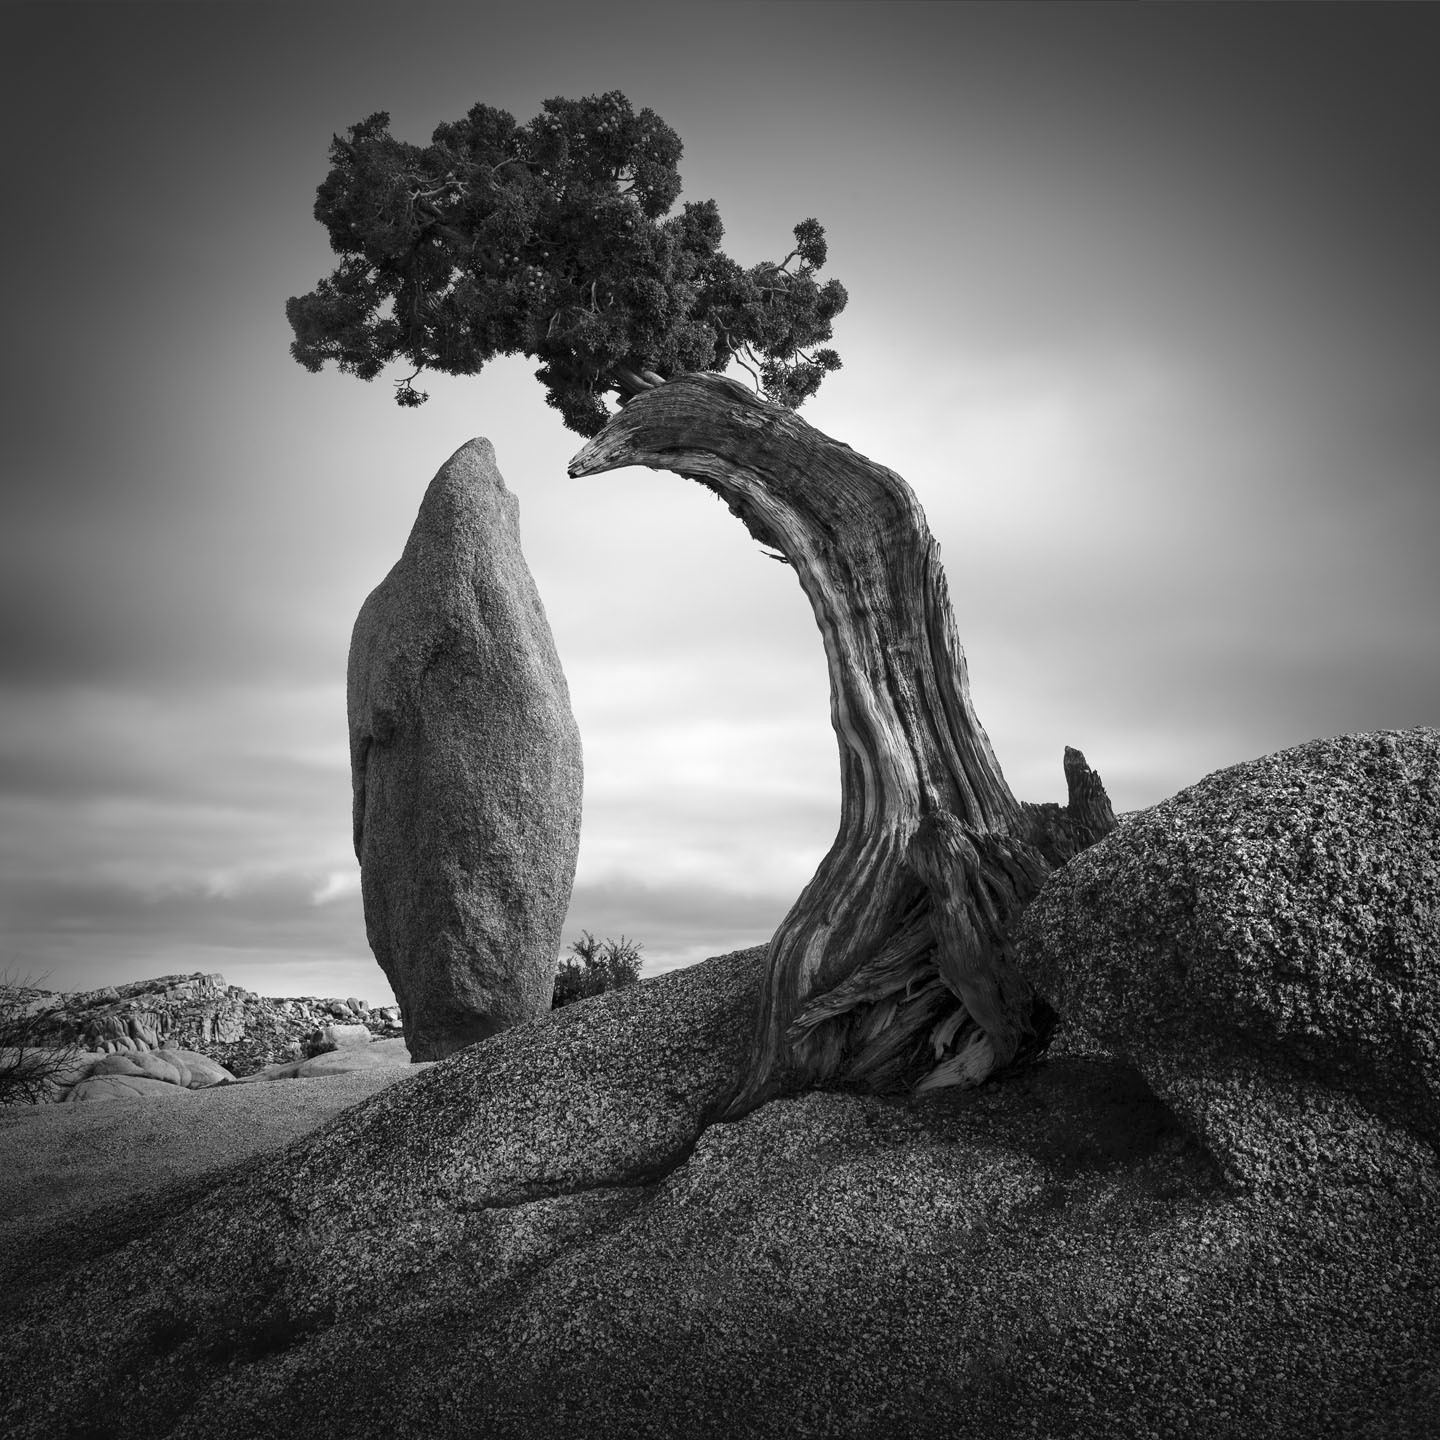 Black and white photo shows a large oval-shaped boulder standing to the left of a tall bare tree trunk with leaves peeking out of the top. Photo was taken at Joshua Tree National Park.